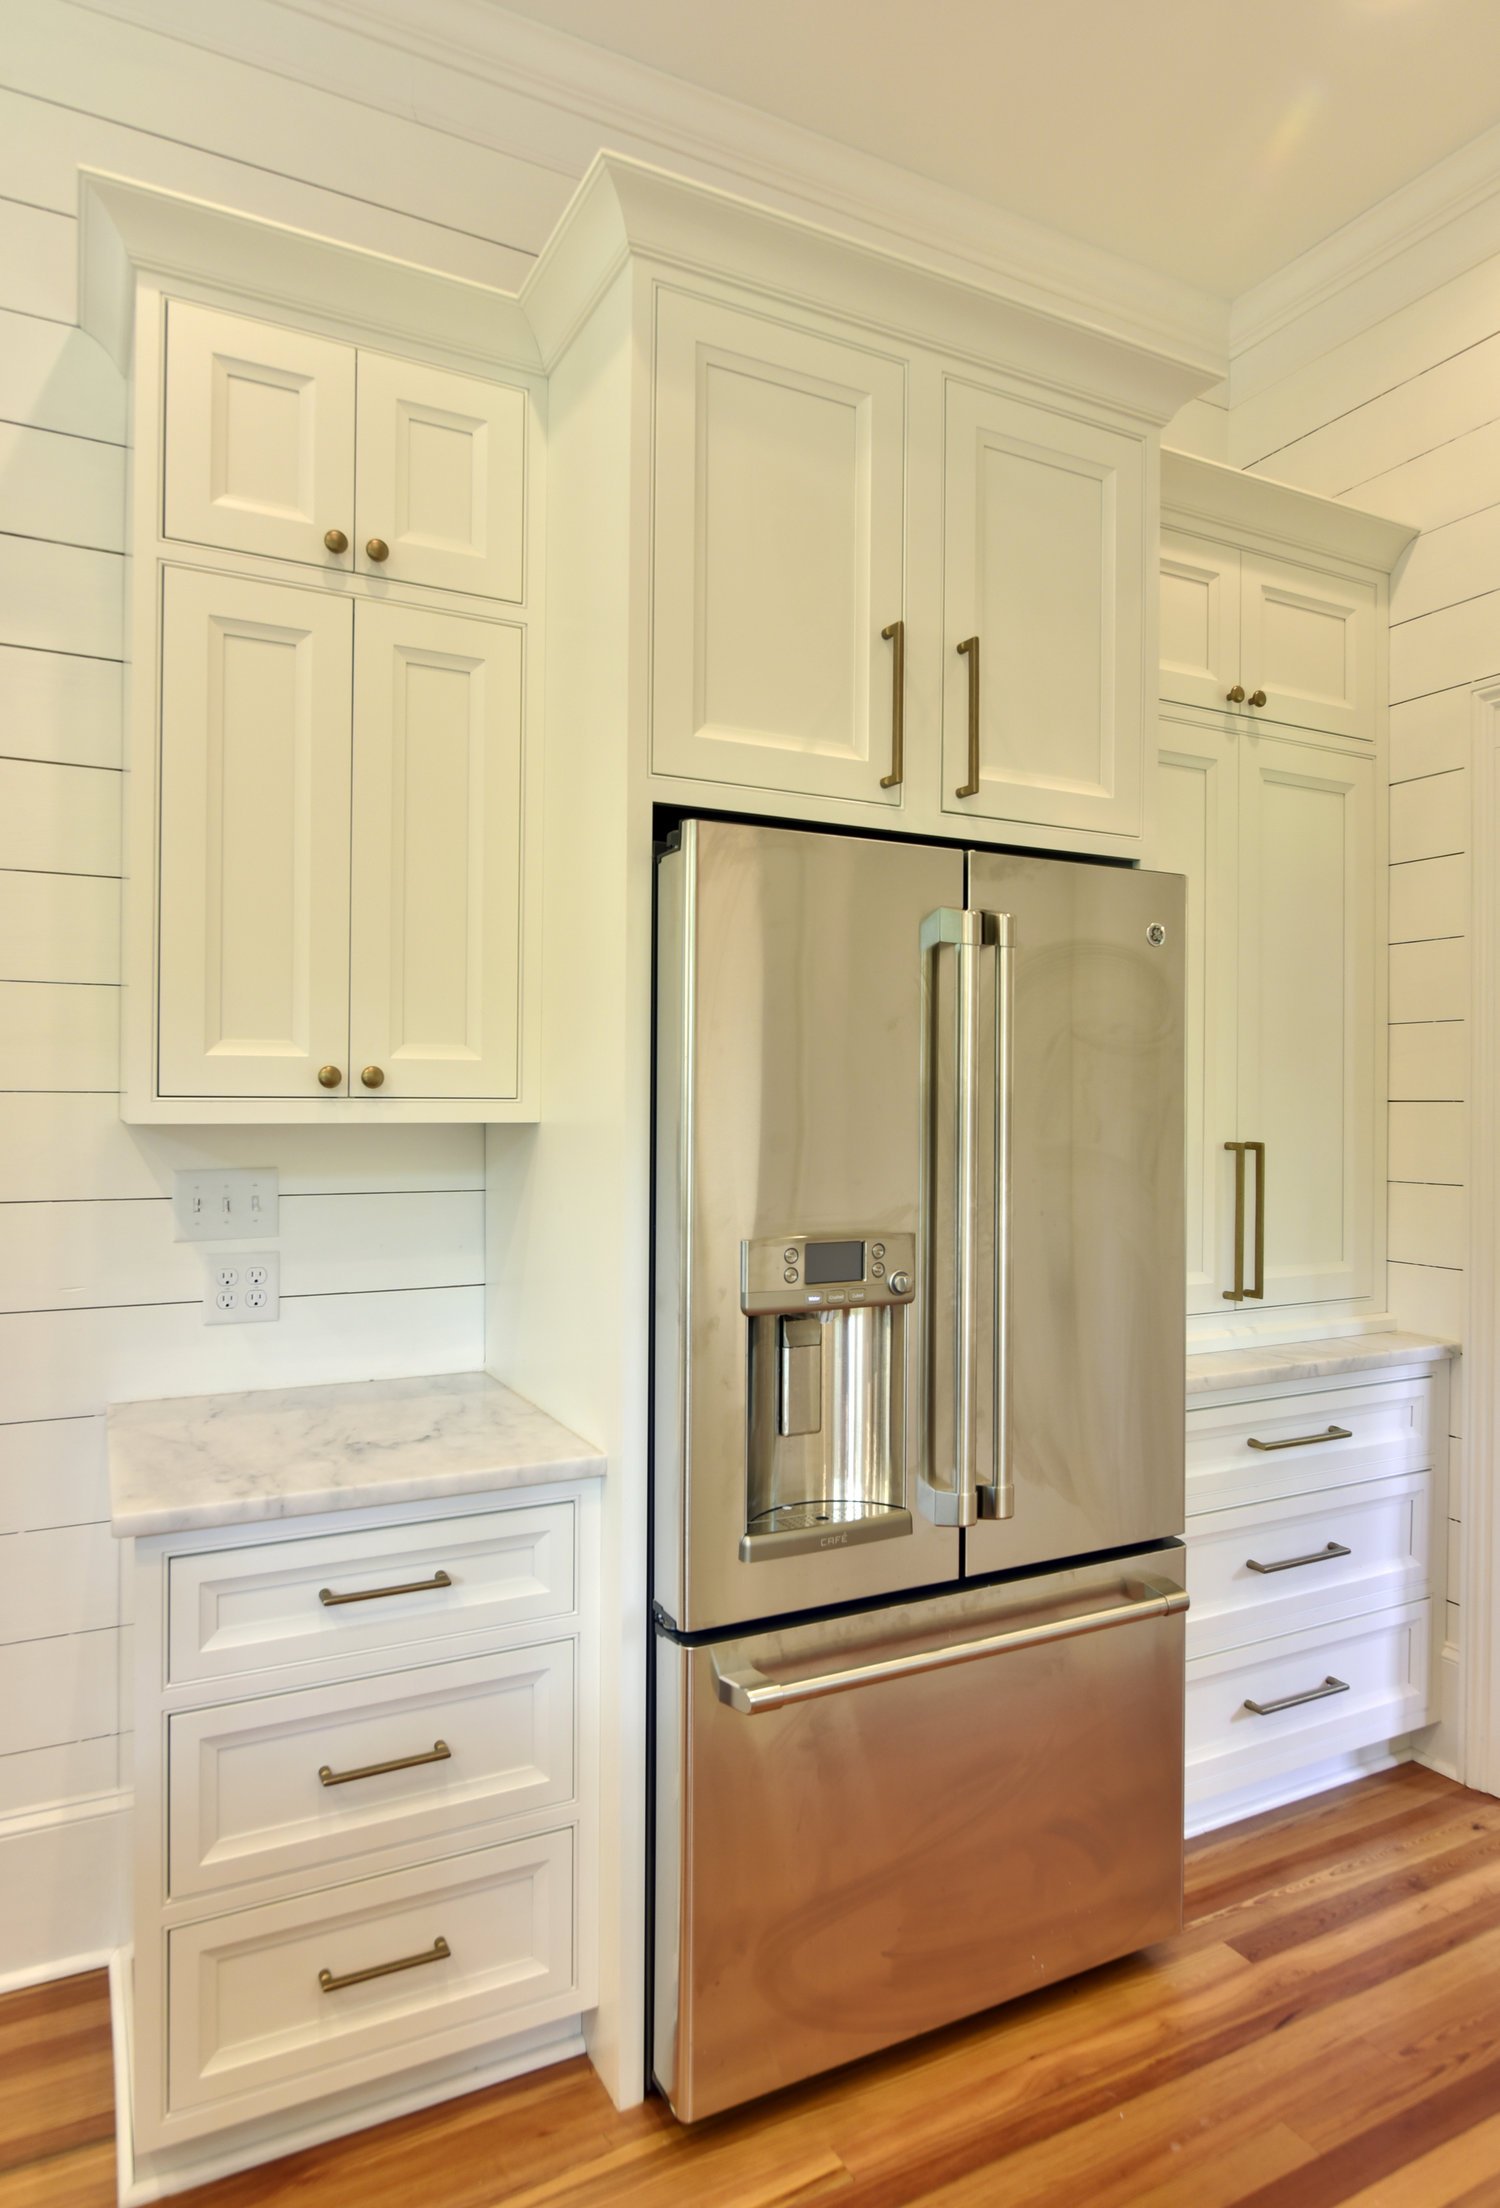 Copper, White, &amp; Natural Light Kitchen Cabinetry